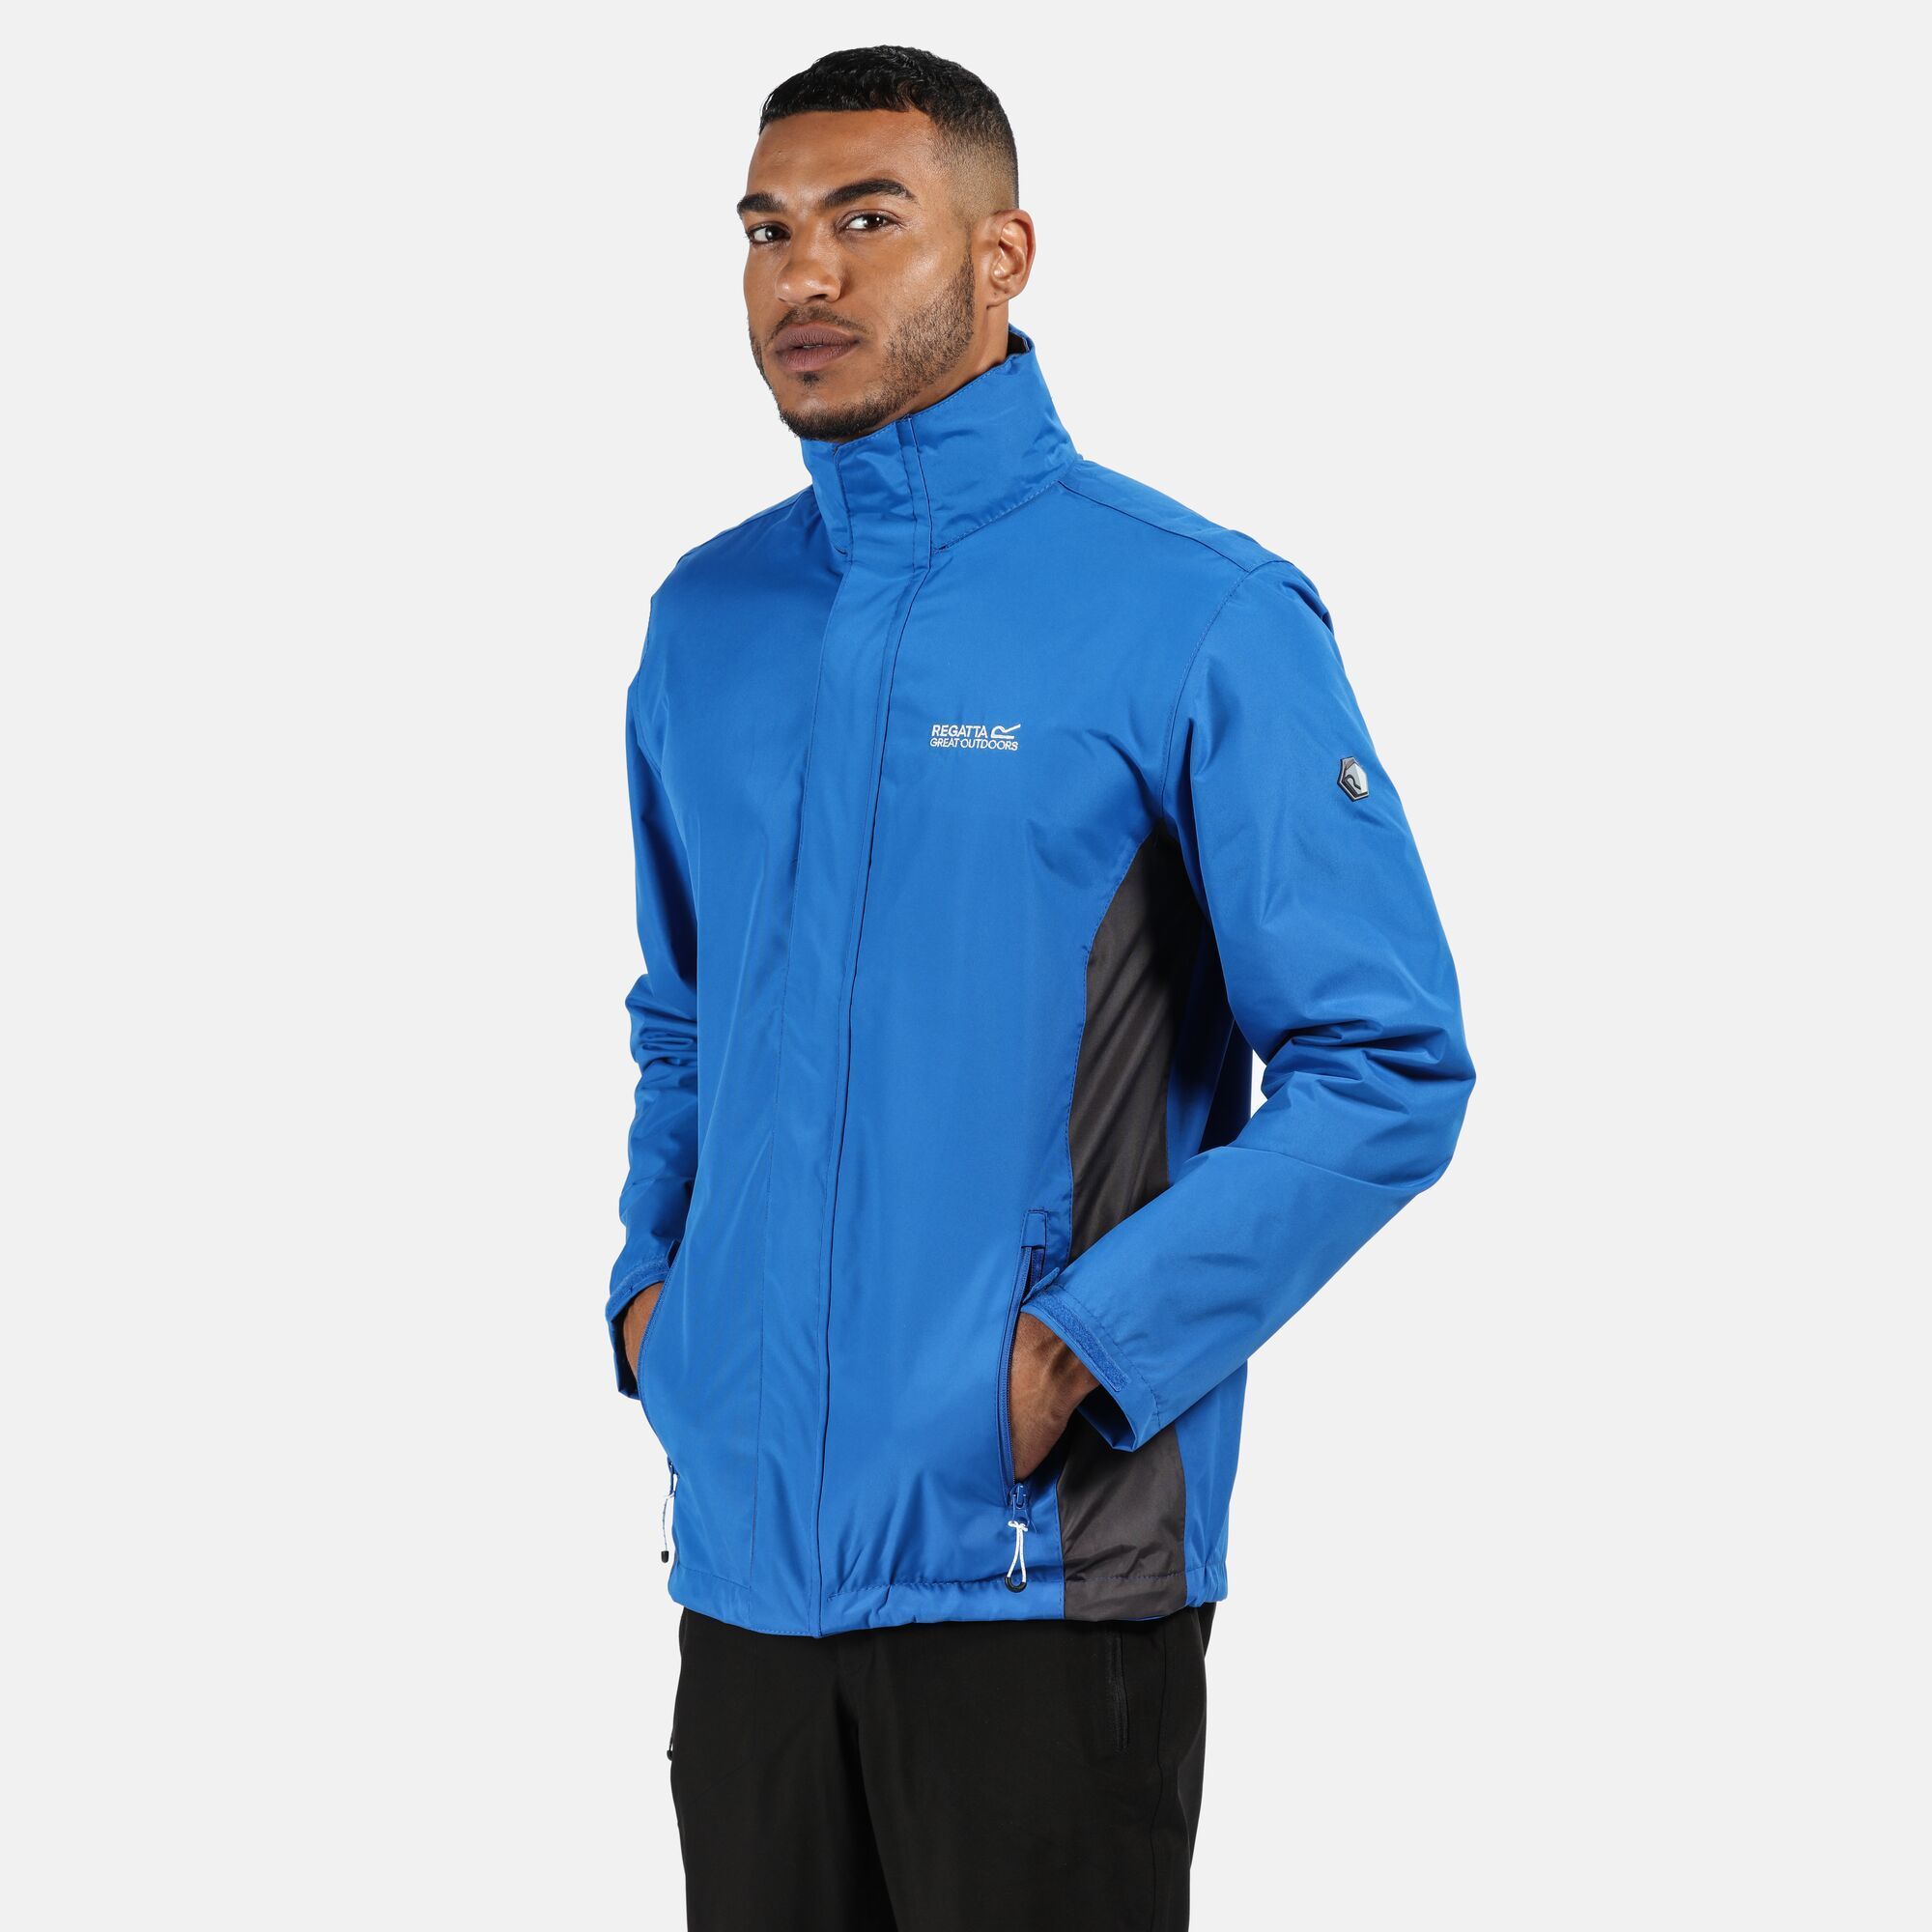 The mens Matt is a classic waterproof shell jacket styled with a relaxed everyday fit for weekend strolls or day-to-day wear. Its made from seam sealed Hydrafort fabric to guard against showers and comes fully lined for next-to-skin comfort. The adjustable hood zips away during dry spells and the hem can be pulled in for a close, breeze-blocking fit. Finished with two zipped pockets for keys, phones (and dog biscuits). 100% Polyester. Regatta Mens sizing (chest approx): XS (35-36in/89-91.5cm), S (37-38in/94-96.5cm), M (39-40in/99-101.5cm), L (41-42in/104-106.5cm), XL (43-44in/109-112cm), XXL (46-48in/117-122cm), XXXL (49-51in/124.5-129.5cm), XXXXL (52-54in/132-137cm), XXXXXL (55-57in/140-145cm).